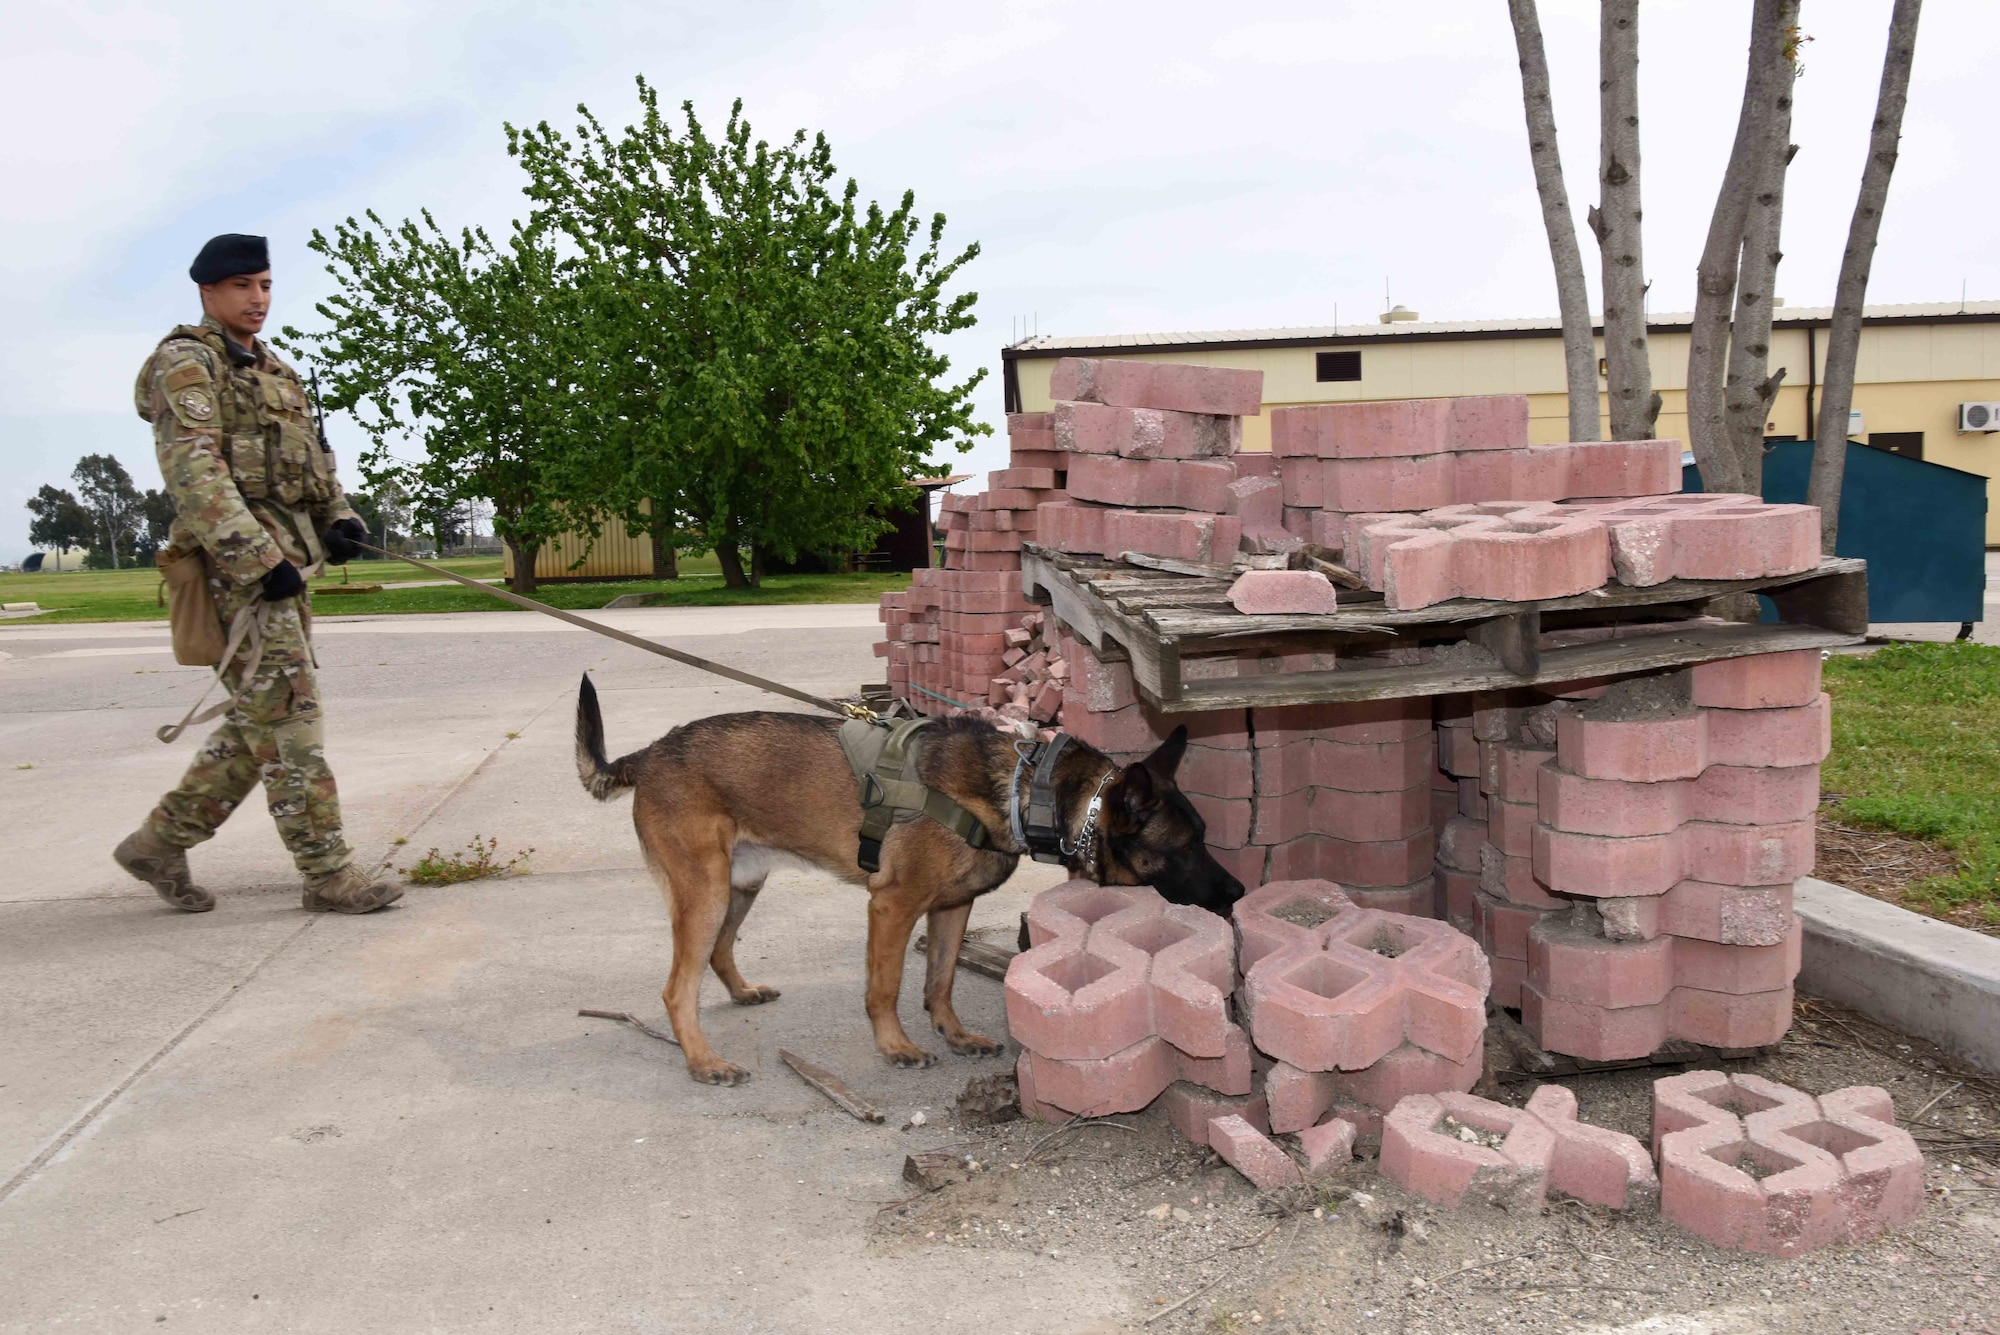 U.S. Air Force Staff Sgt. Zachary Harrison, 39th Security Forces Squadron military working dog handler, and Rambo, MWD, patrol the golf course, April 14, 2020, on Incirlik Air Base, Turkey. MWDs are often the first line of defense when it comes to securing areas and sniffing out explosives and narcotics while on duty. (U.S. Air Force photo by Tech. Sgt. Jim Araos)